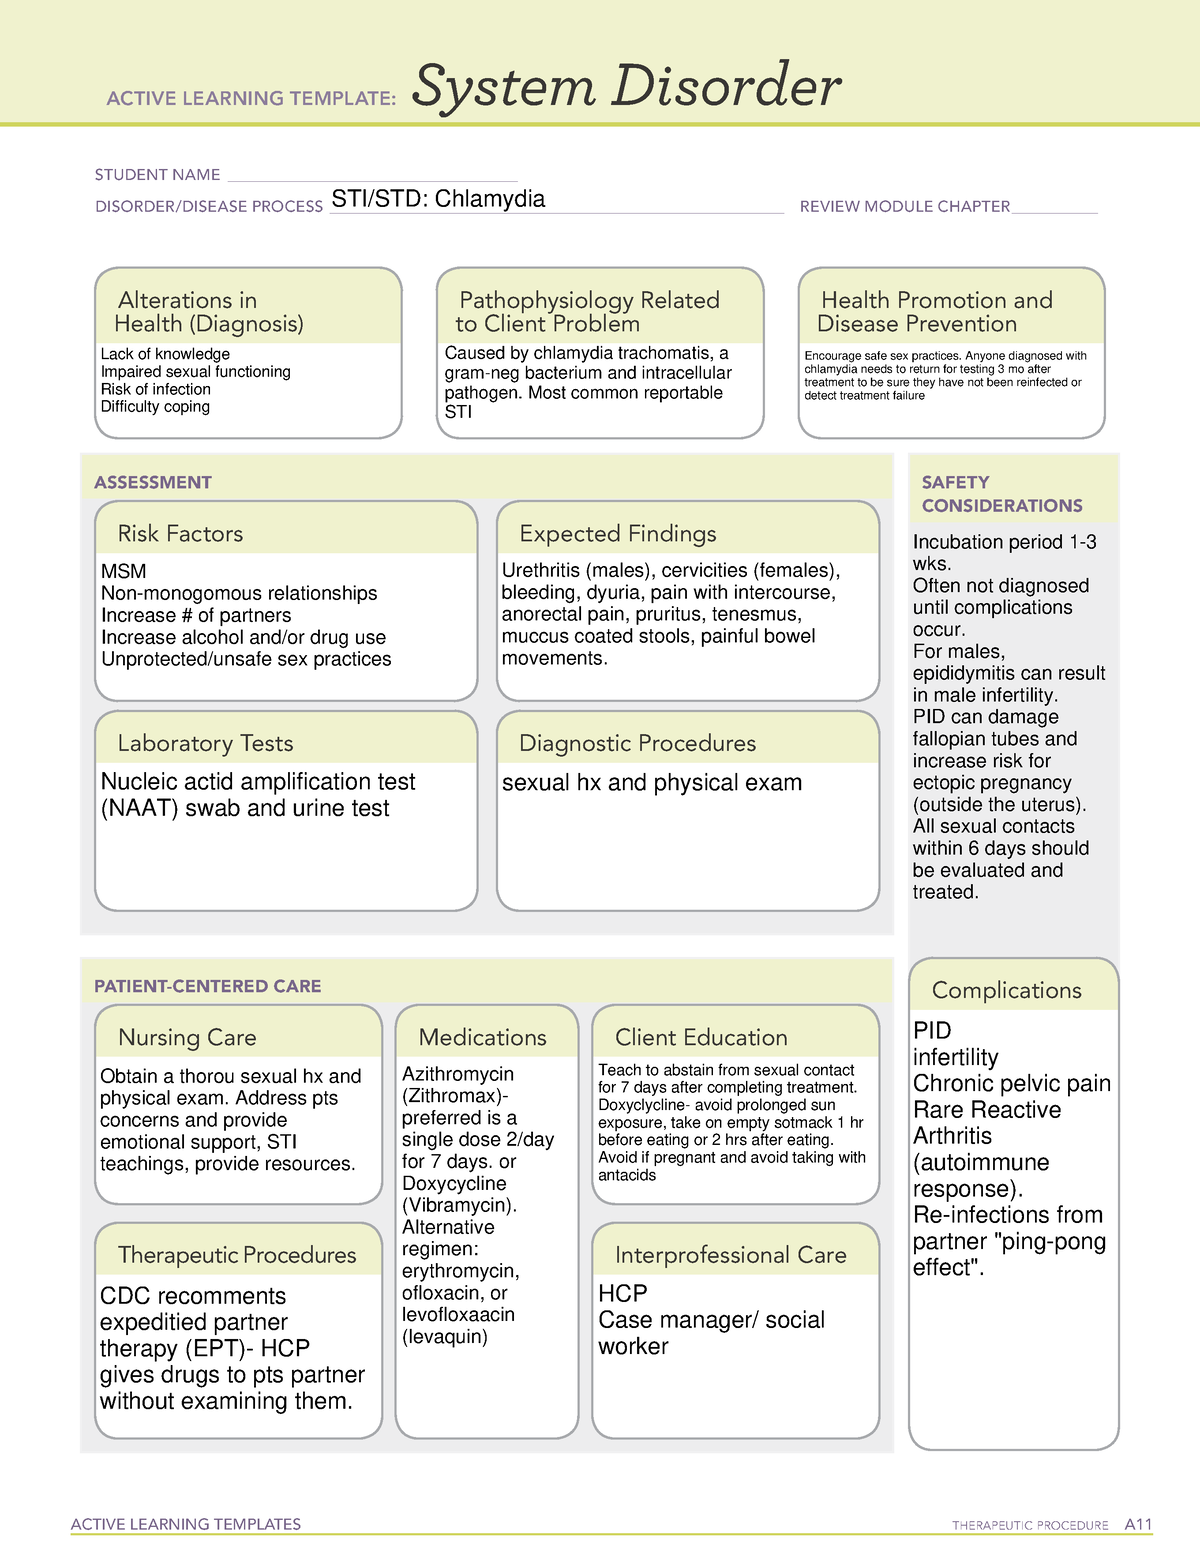 active-learning-template-system-disorder-chlamydia-active-learning